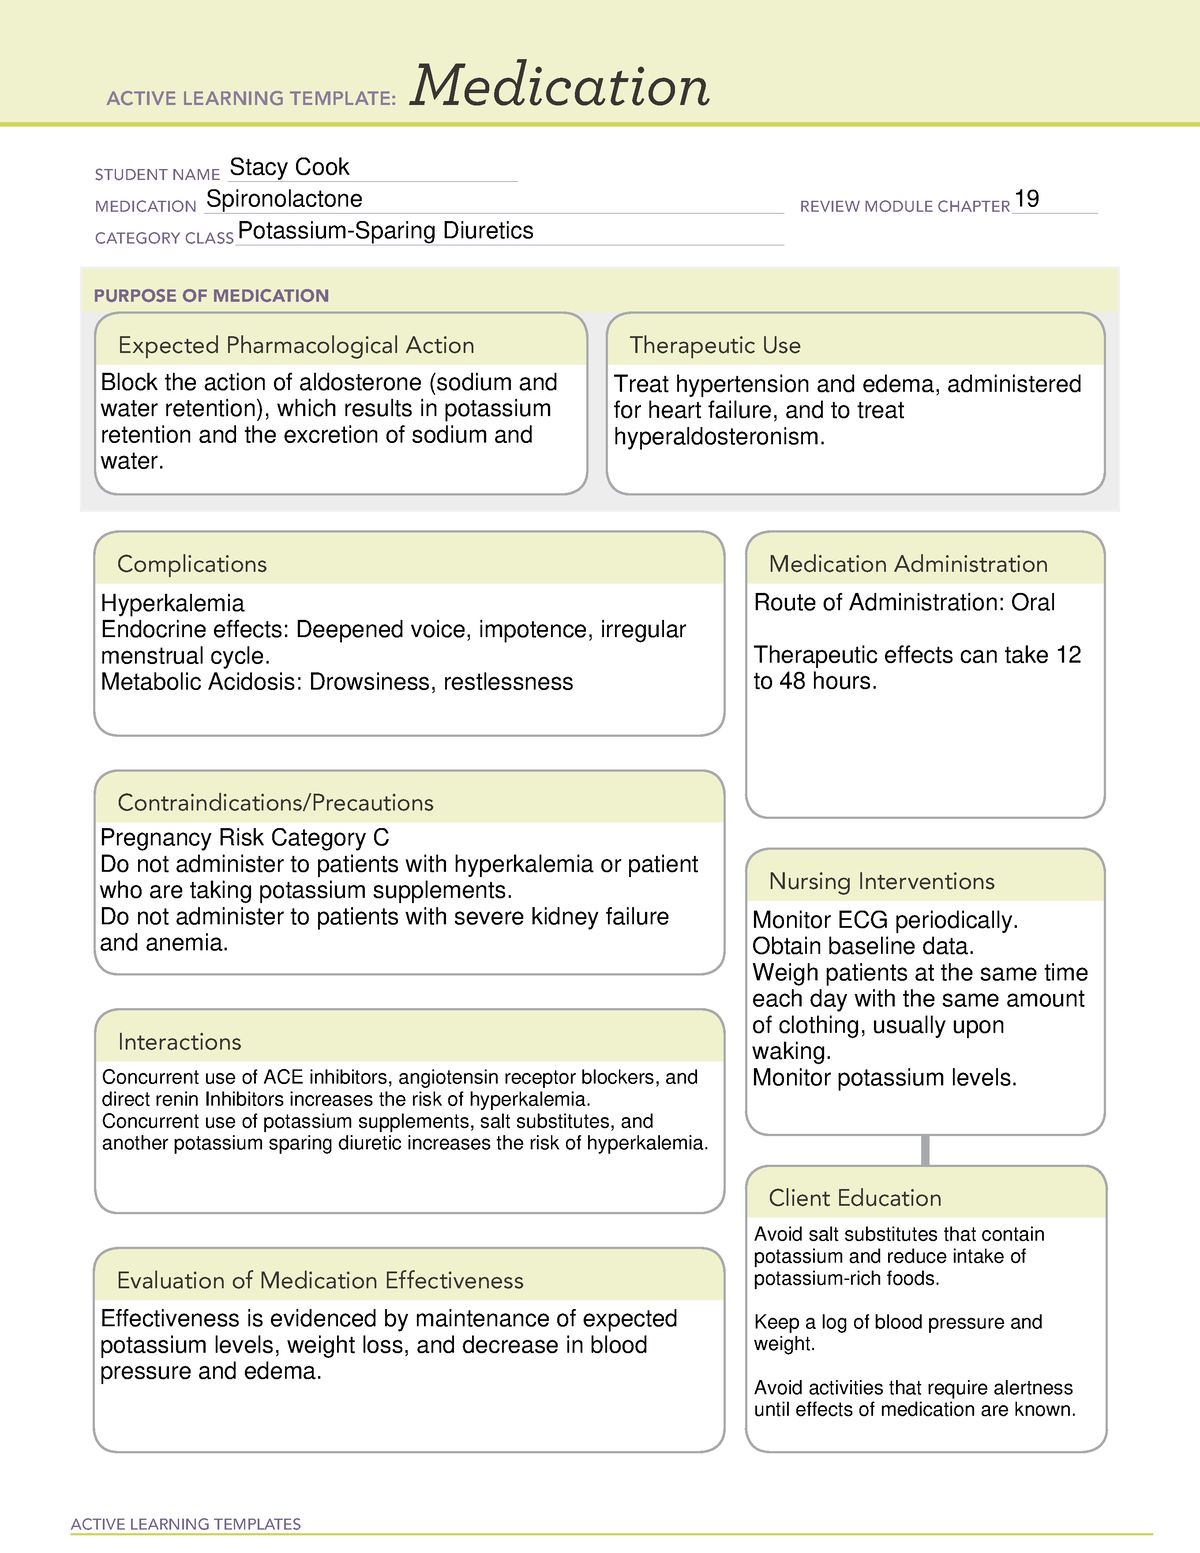 ATI Medication Template Spironolactone ACTIVE LEARNING TEMPLATES